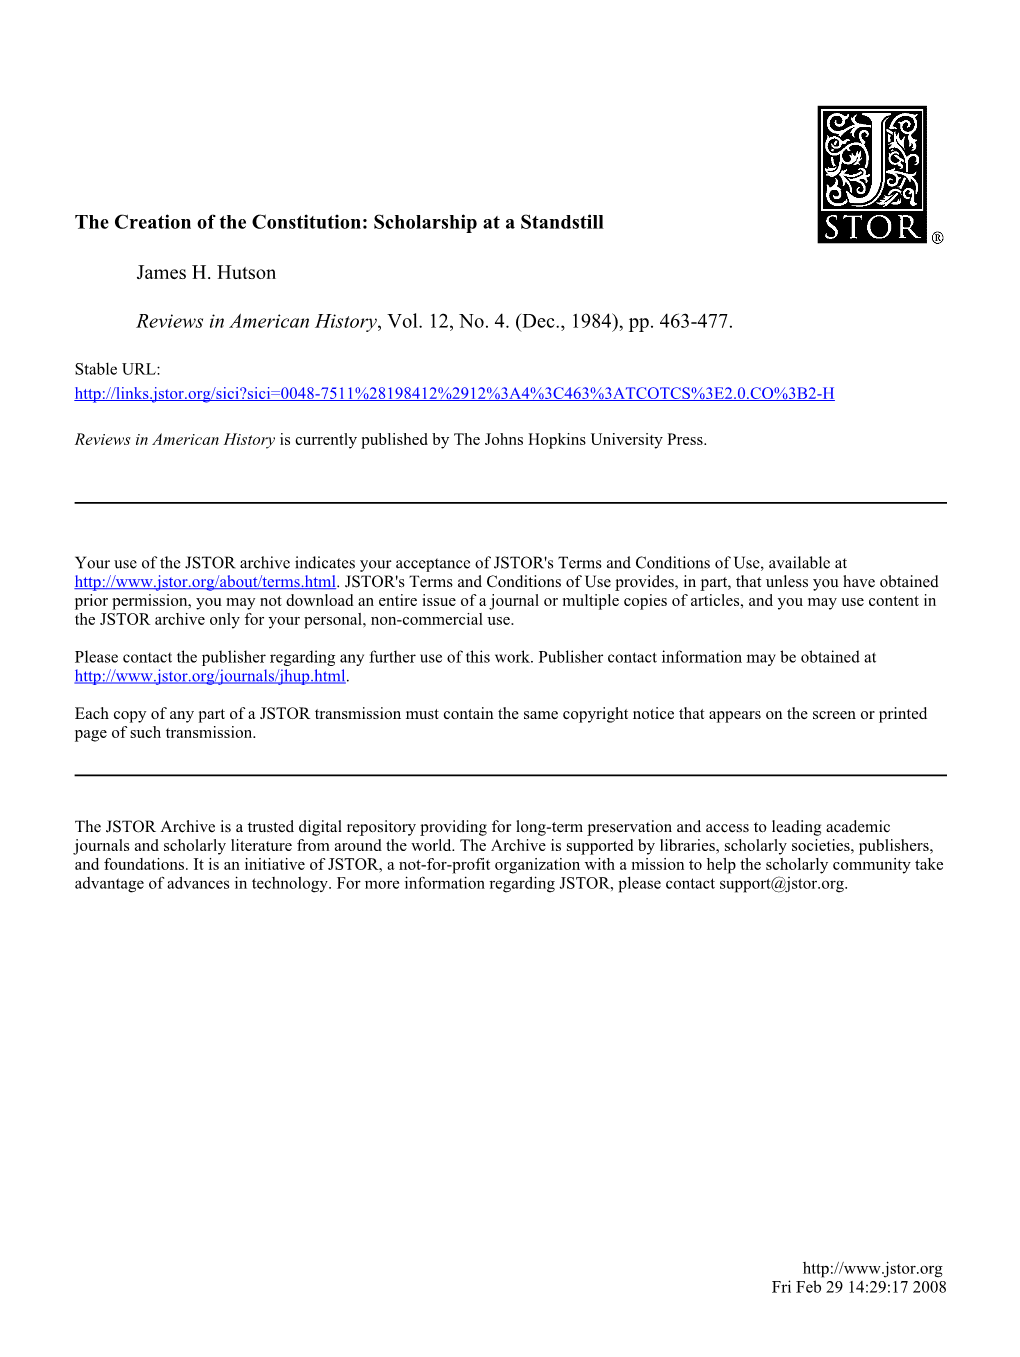 The Creation of the Constitution: Scholarship at a Standstill James H